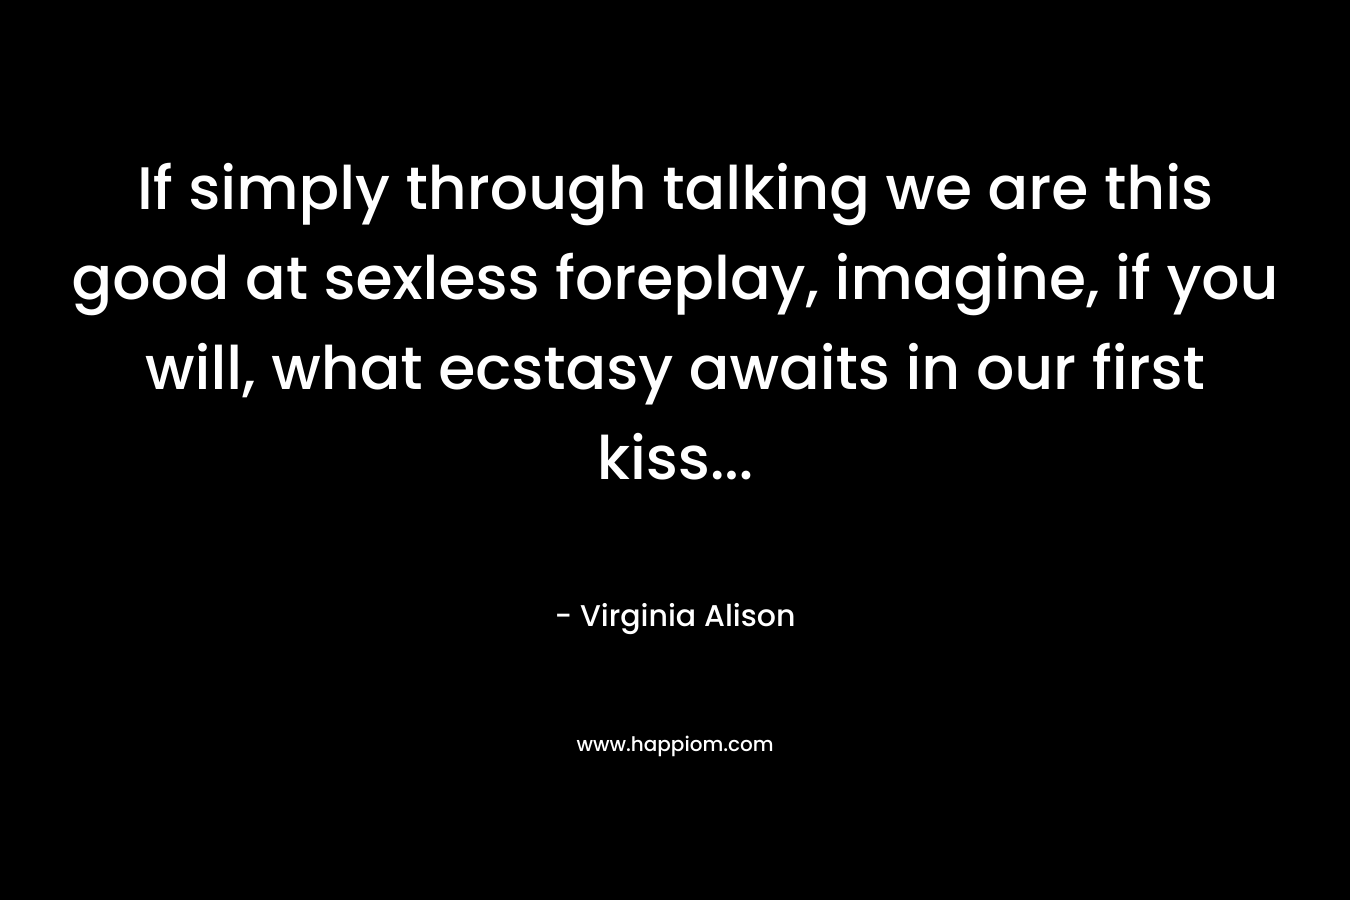 If simply through talking we are this good at sexless foreplay, imagine, if you will, what ecstasy awaits in our first kiss… – Virginia Alison